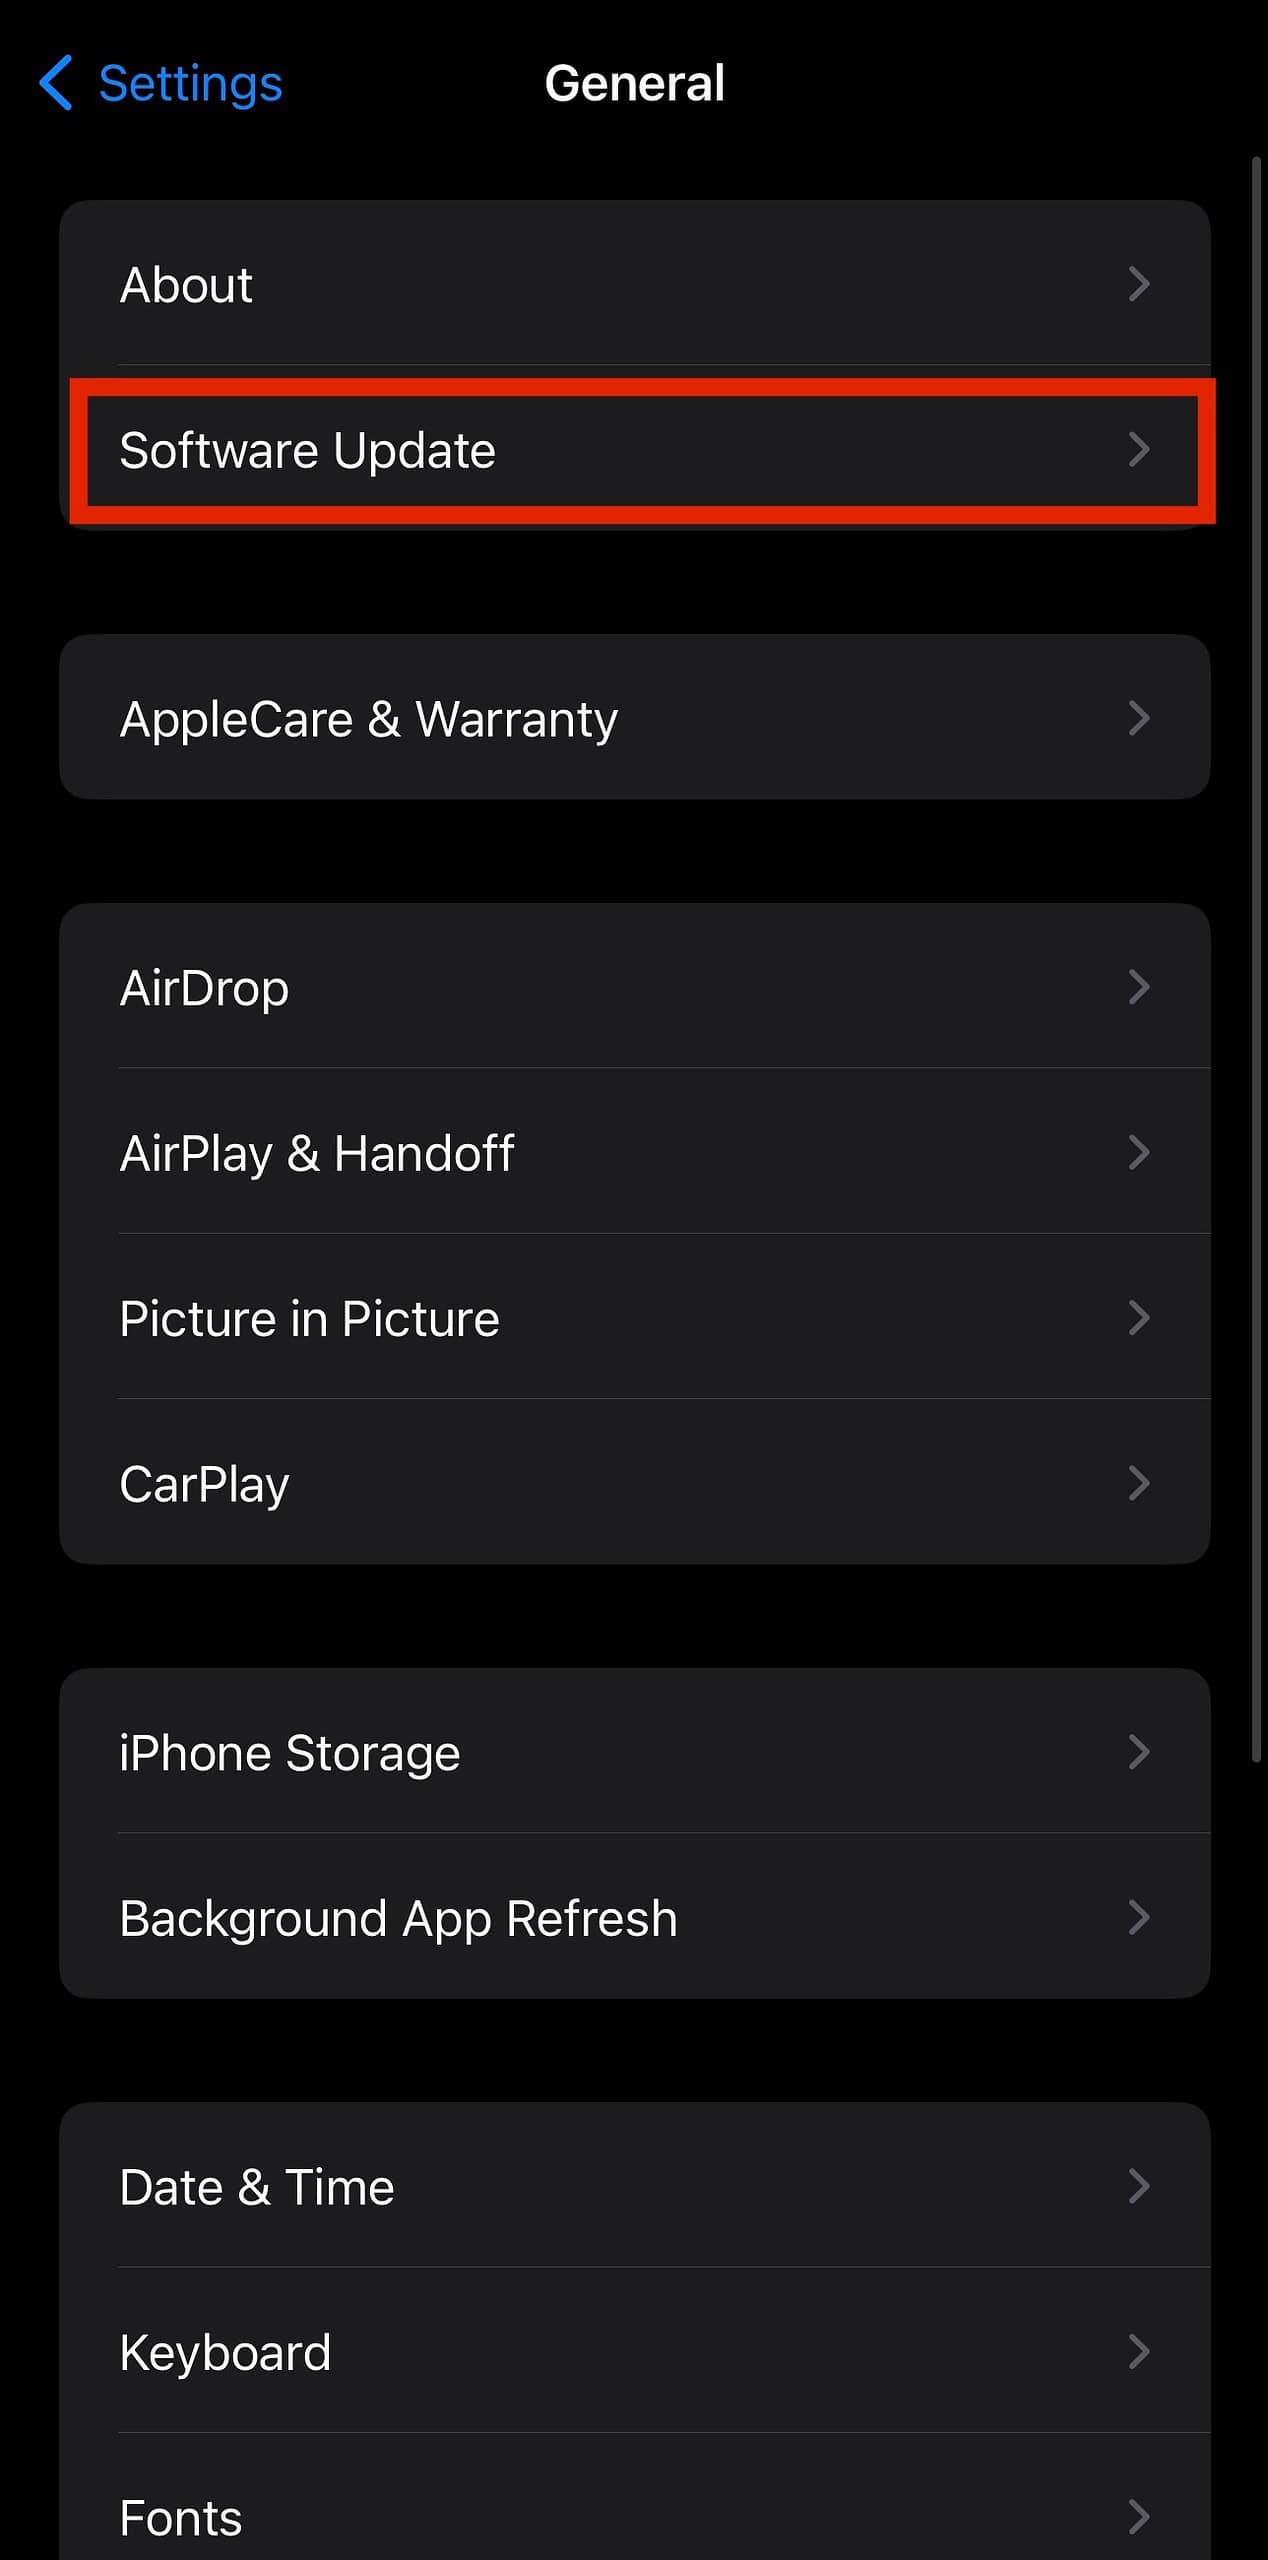 General settings on an iPhone